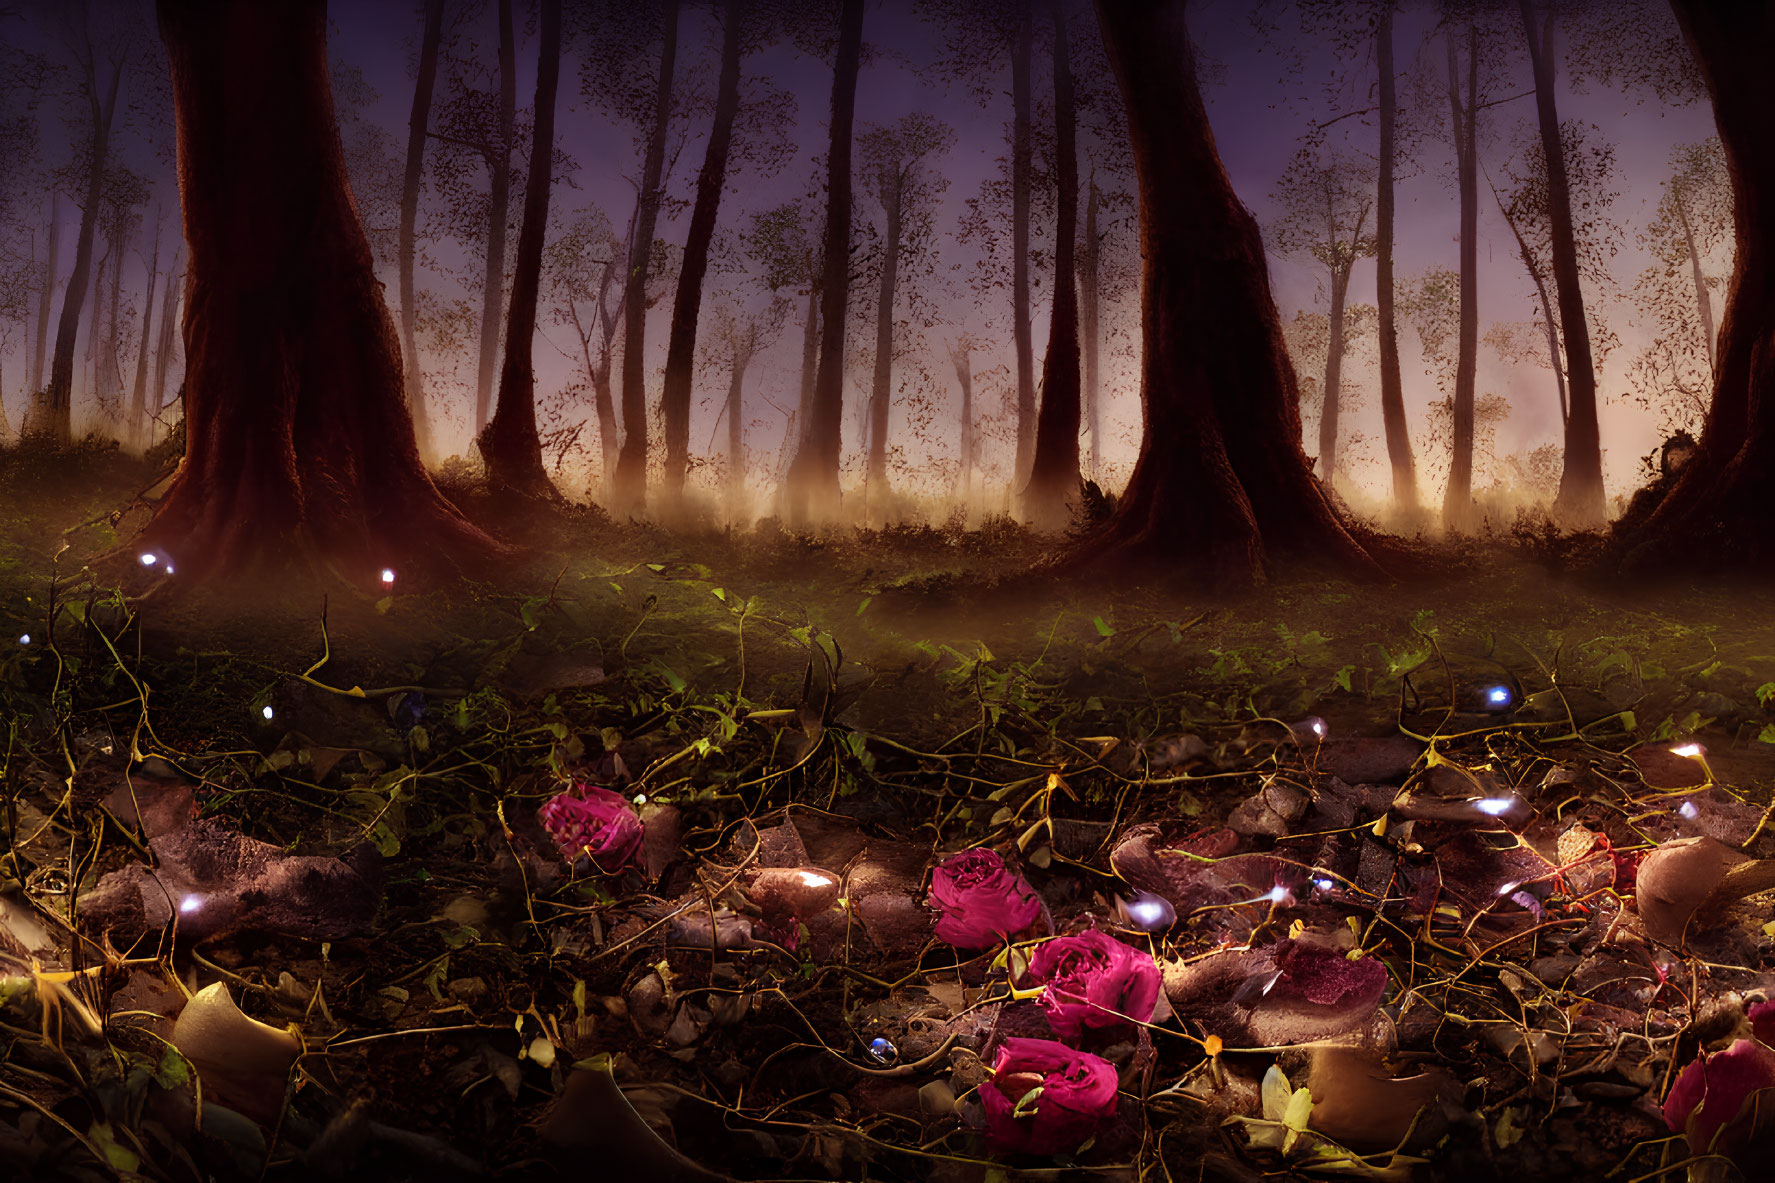 Twilight enchanted forest with large trees and pink flowers